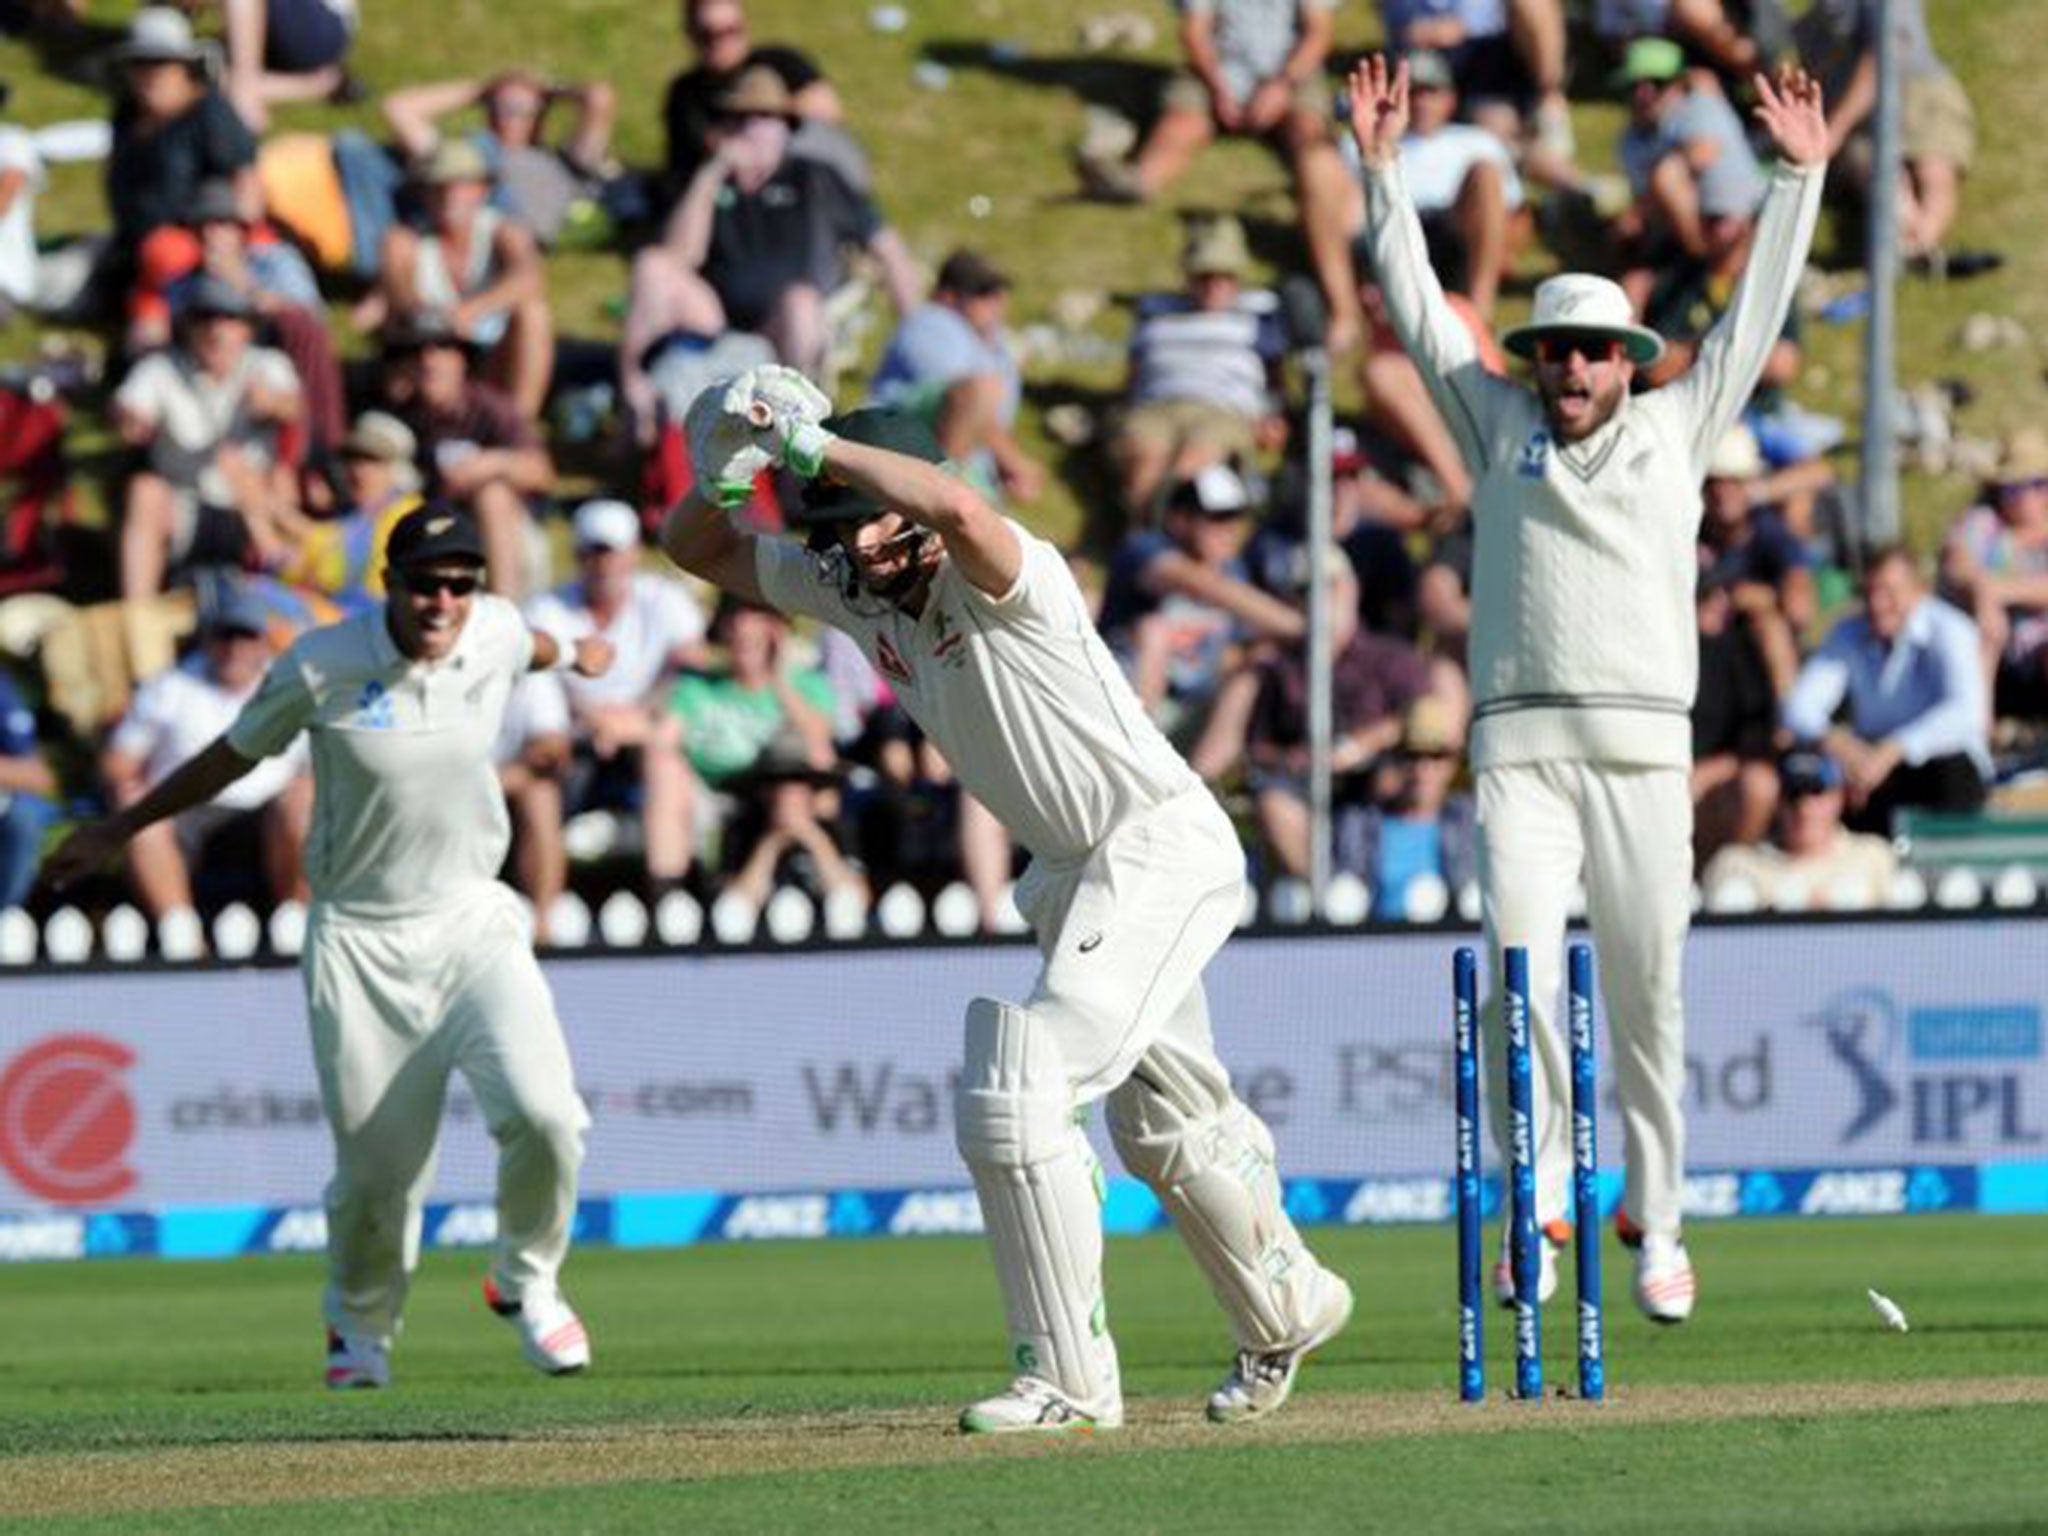 Australia’s Adam Voges is bowled late on by Doug Bracewell – only for the umpire to mistakenly call a no ball